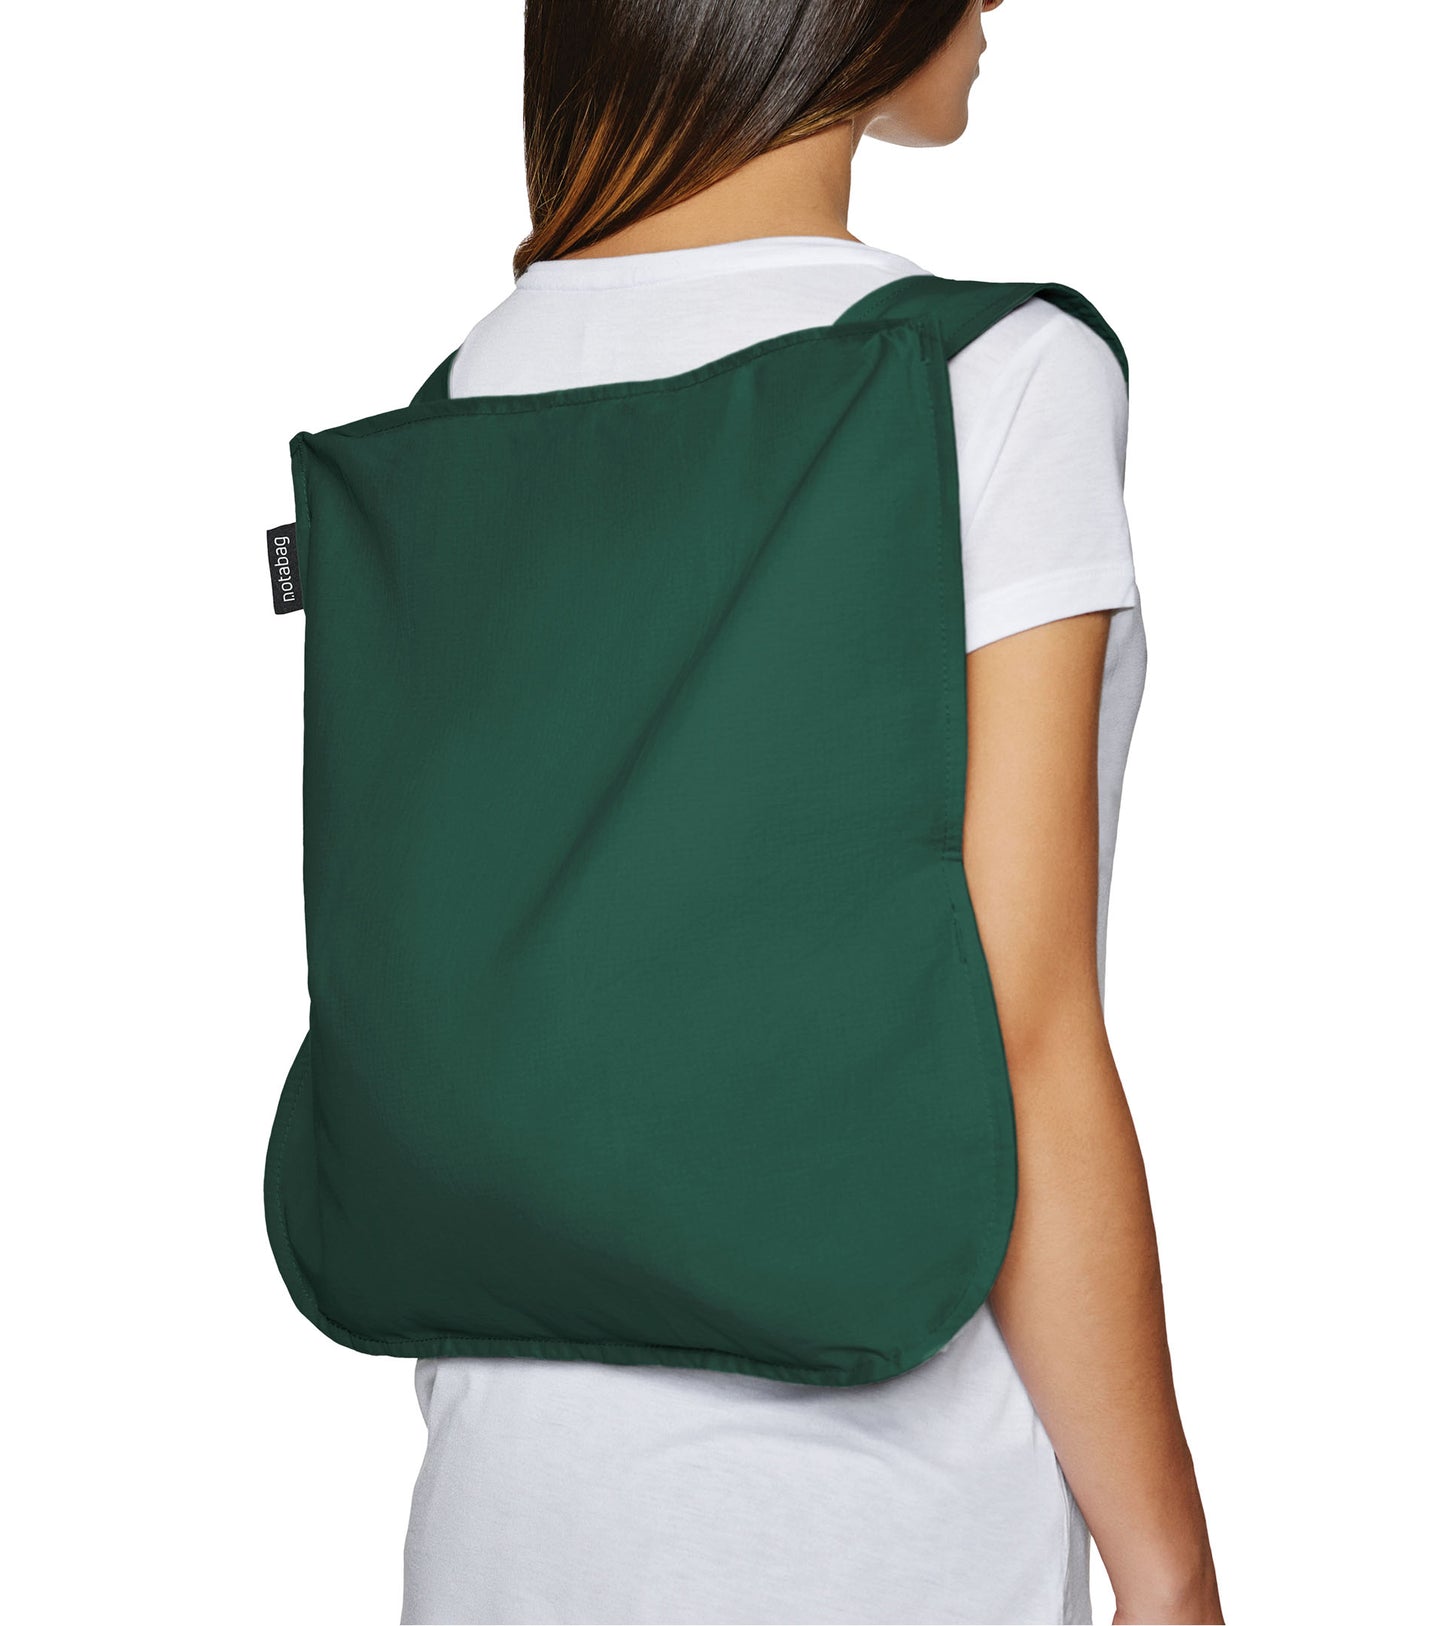 Notabag Foldable reusable backpack/tote bag in forest green unfolded to backpack and on a models back